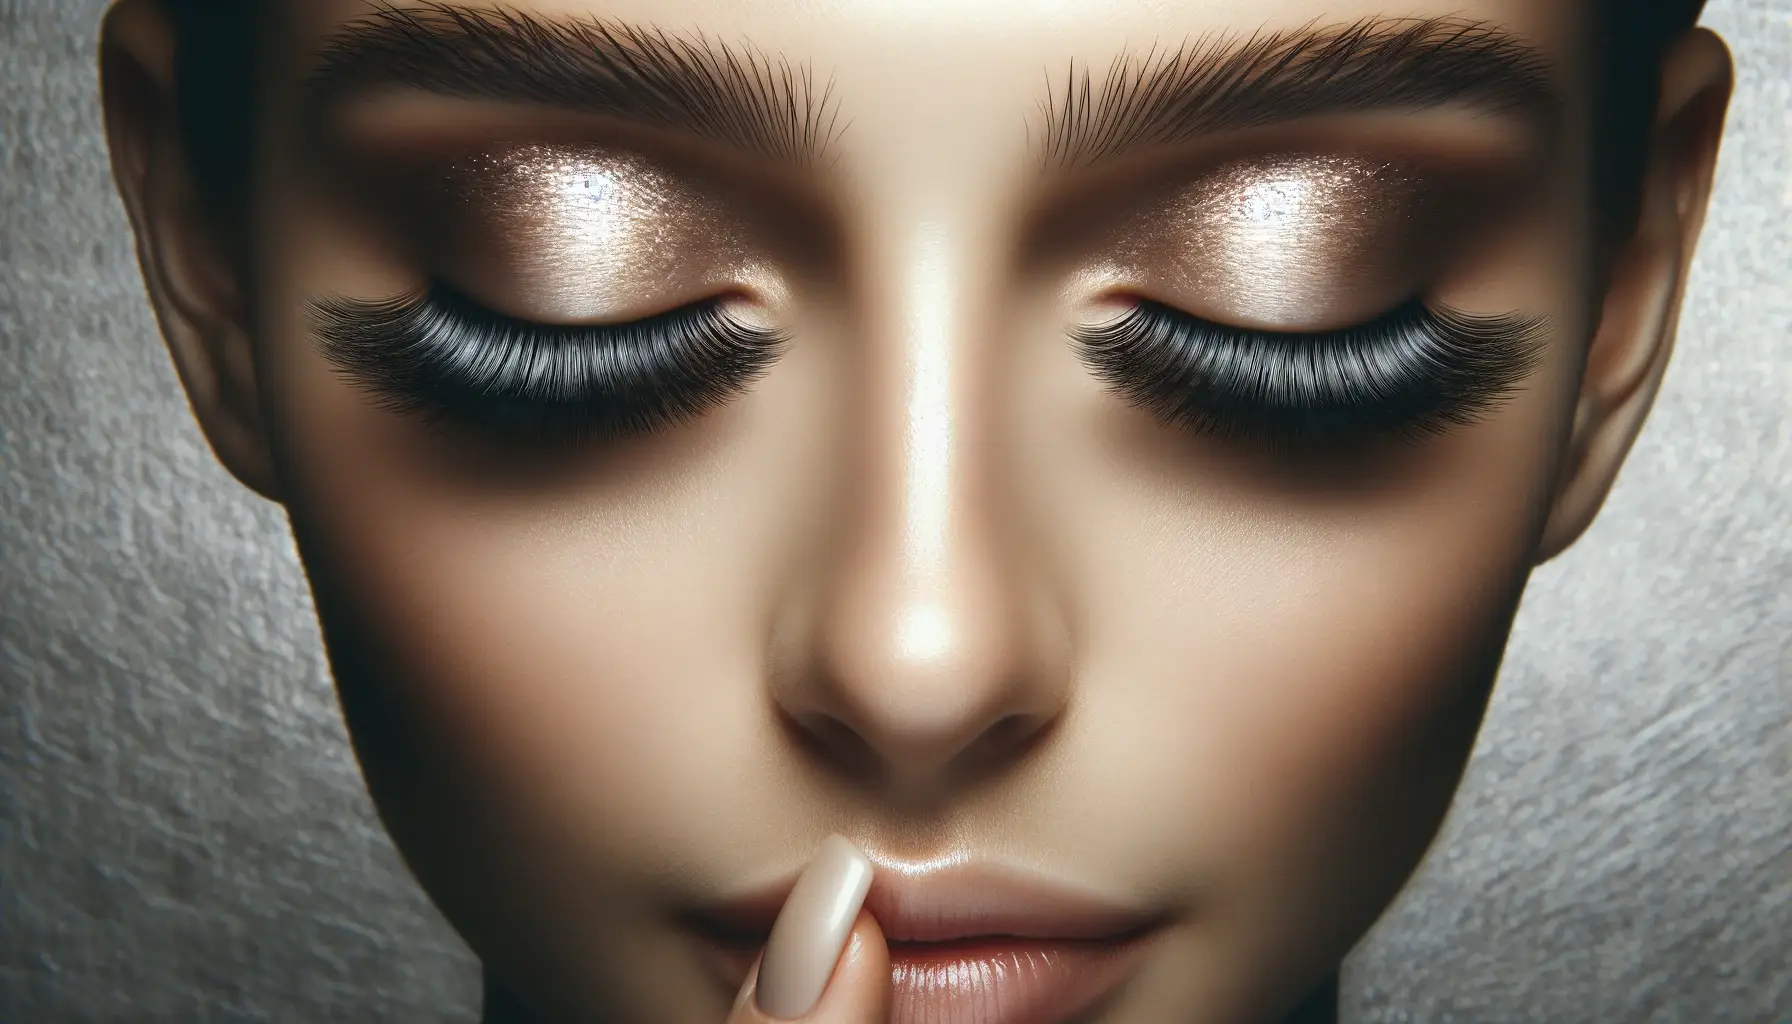 Choosing the right lash extensions for your eye shape